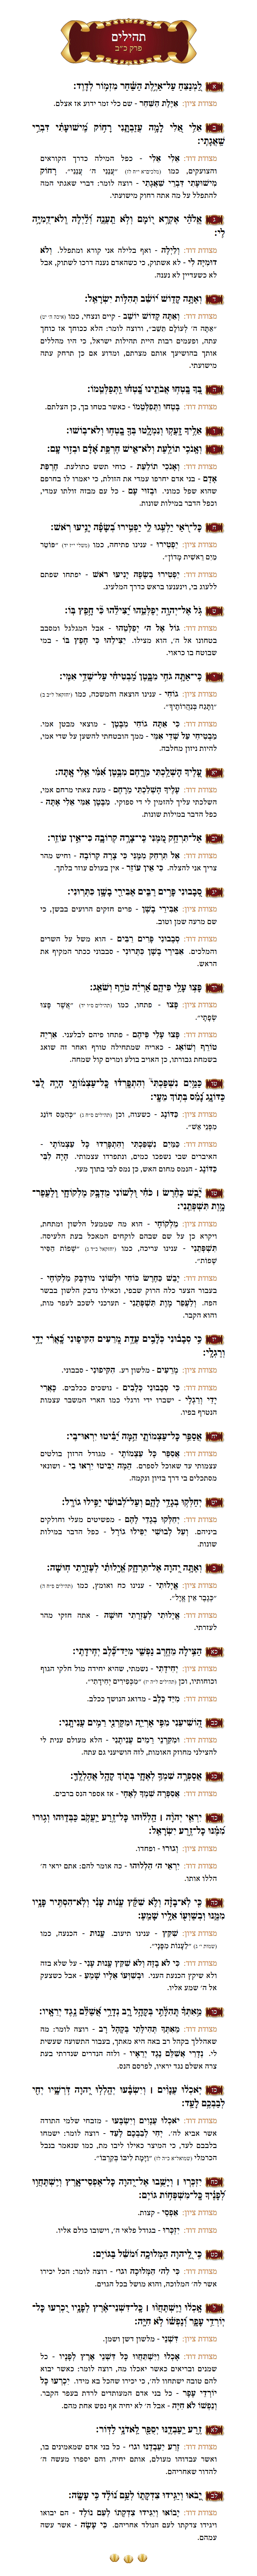 Sefer Tehillim Chapter 22 with commentary